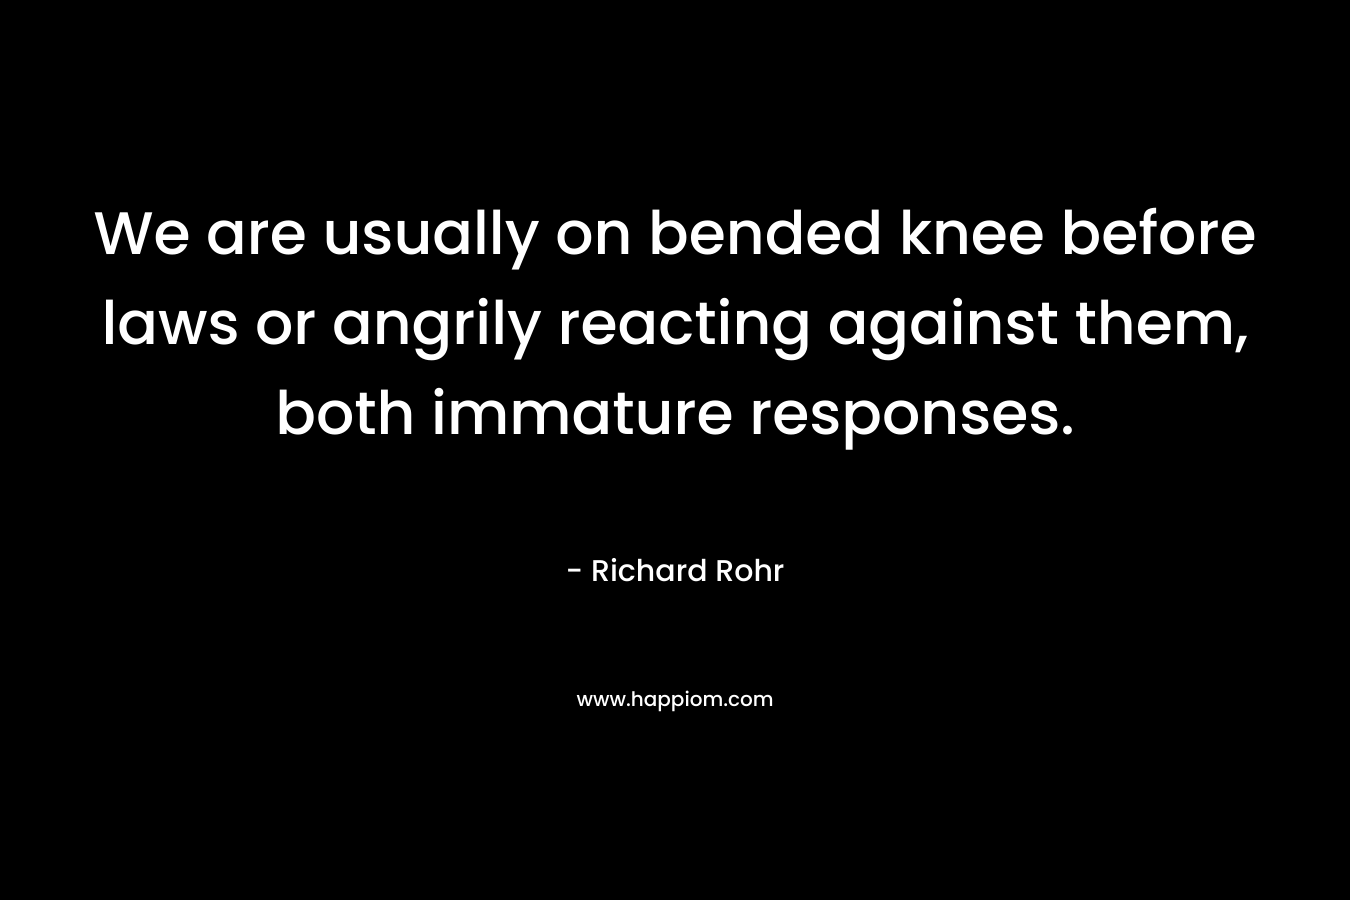 We are usually on bended knee before laws or angrily reacting against them, both immature responses.